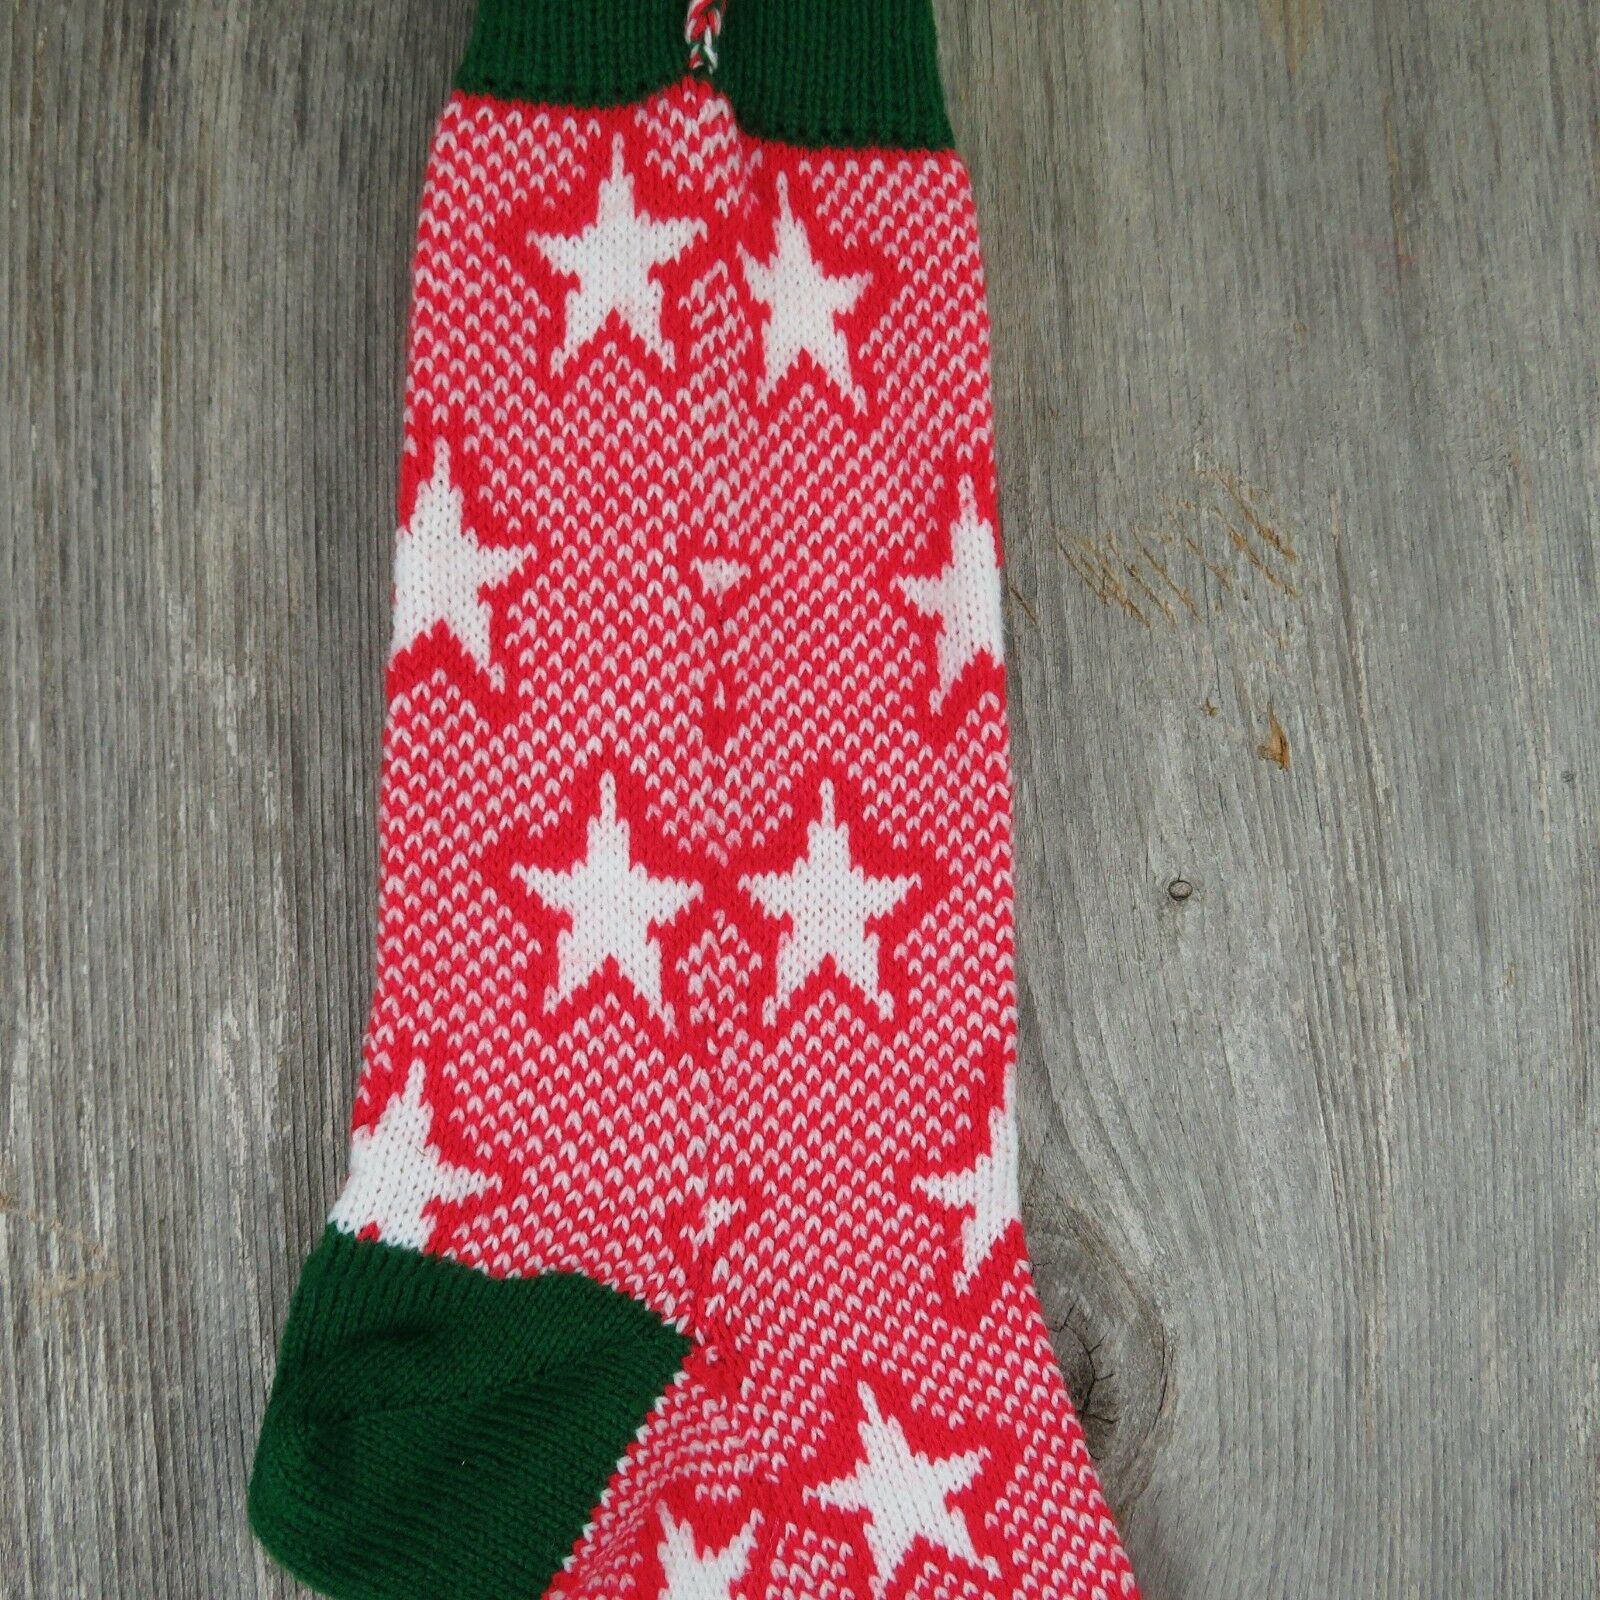 Vintage Christmas Stocking Stars Knitted Knit Green Red White Large ST36 - At Grandma's Table